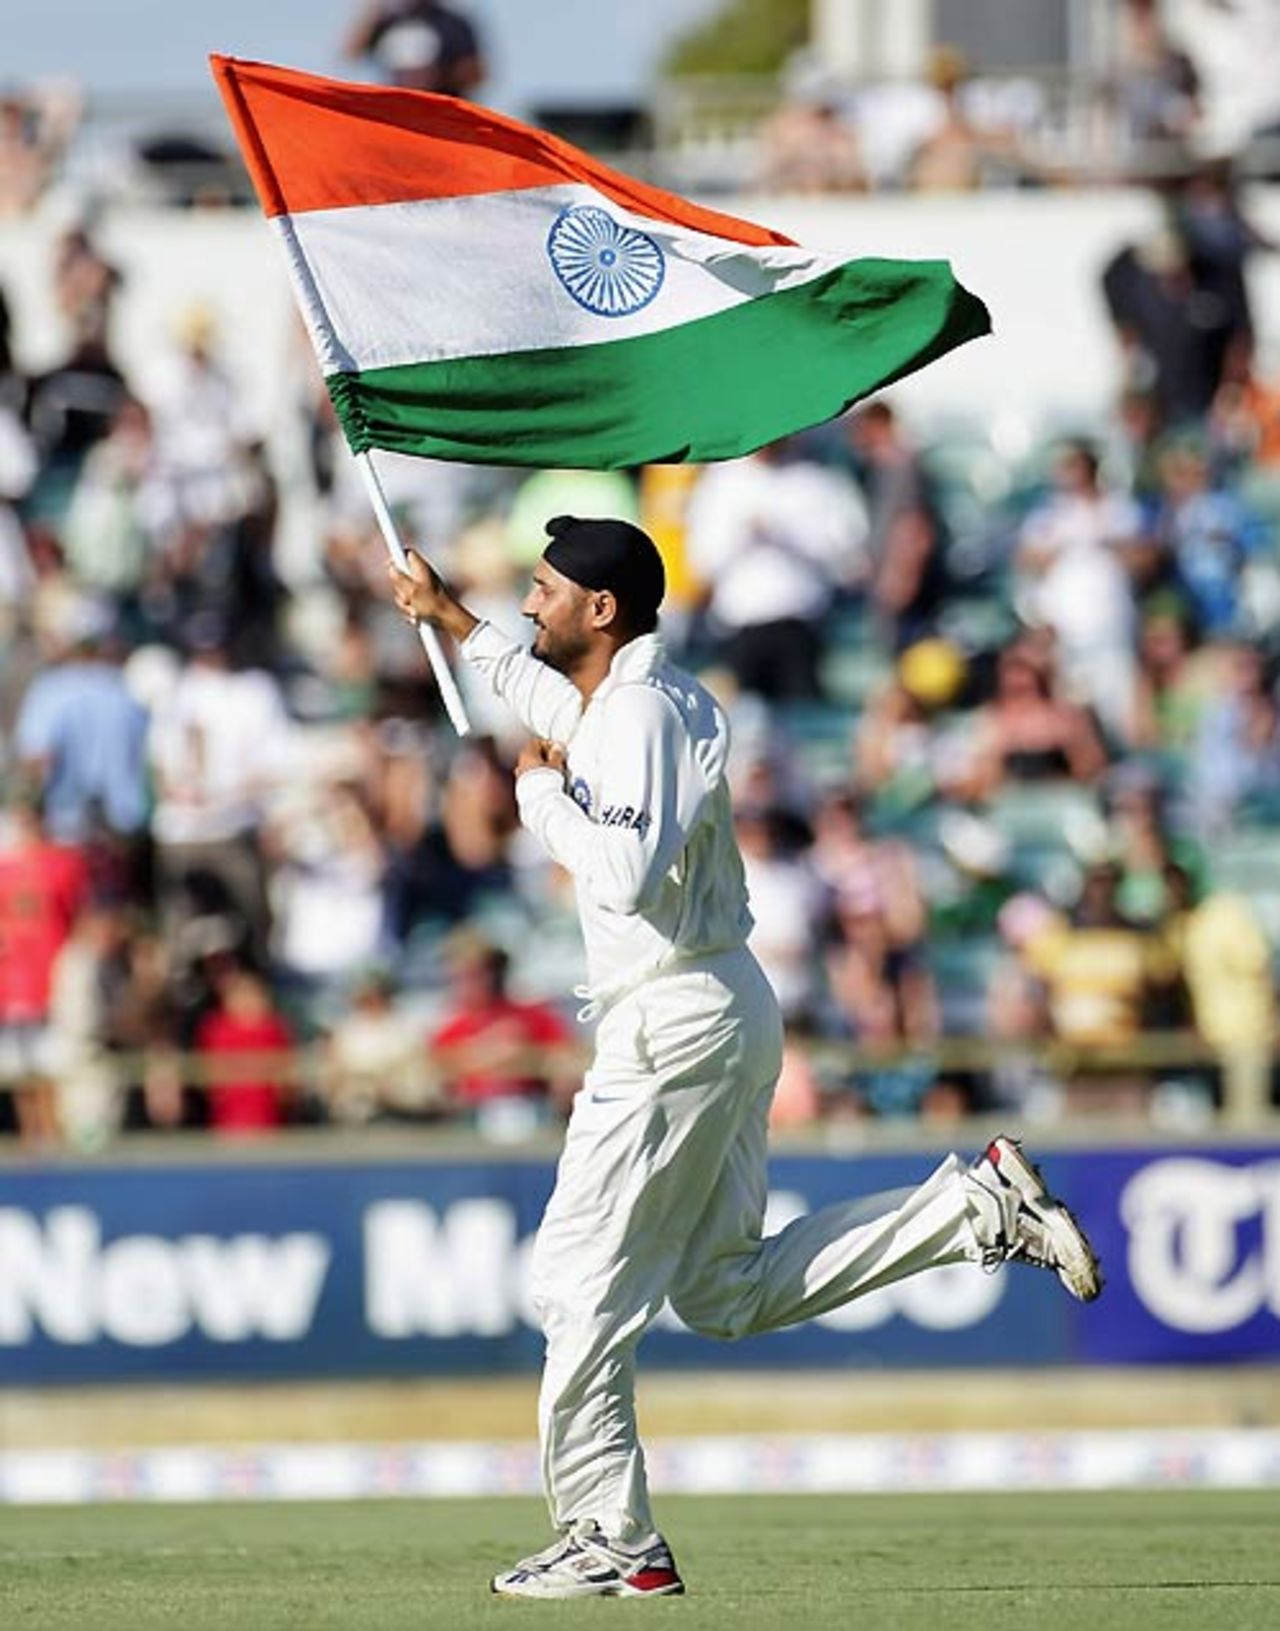 Harbhajan Singh runs out with the Indian flag, Australia v India, 3rd Test, Perth, 4th day, January 19, 2008